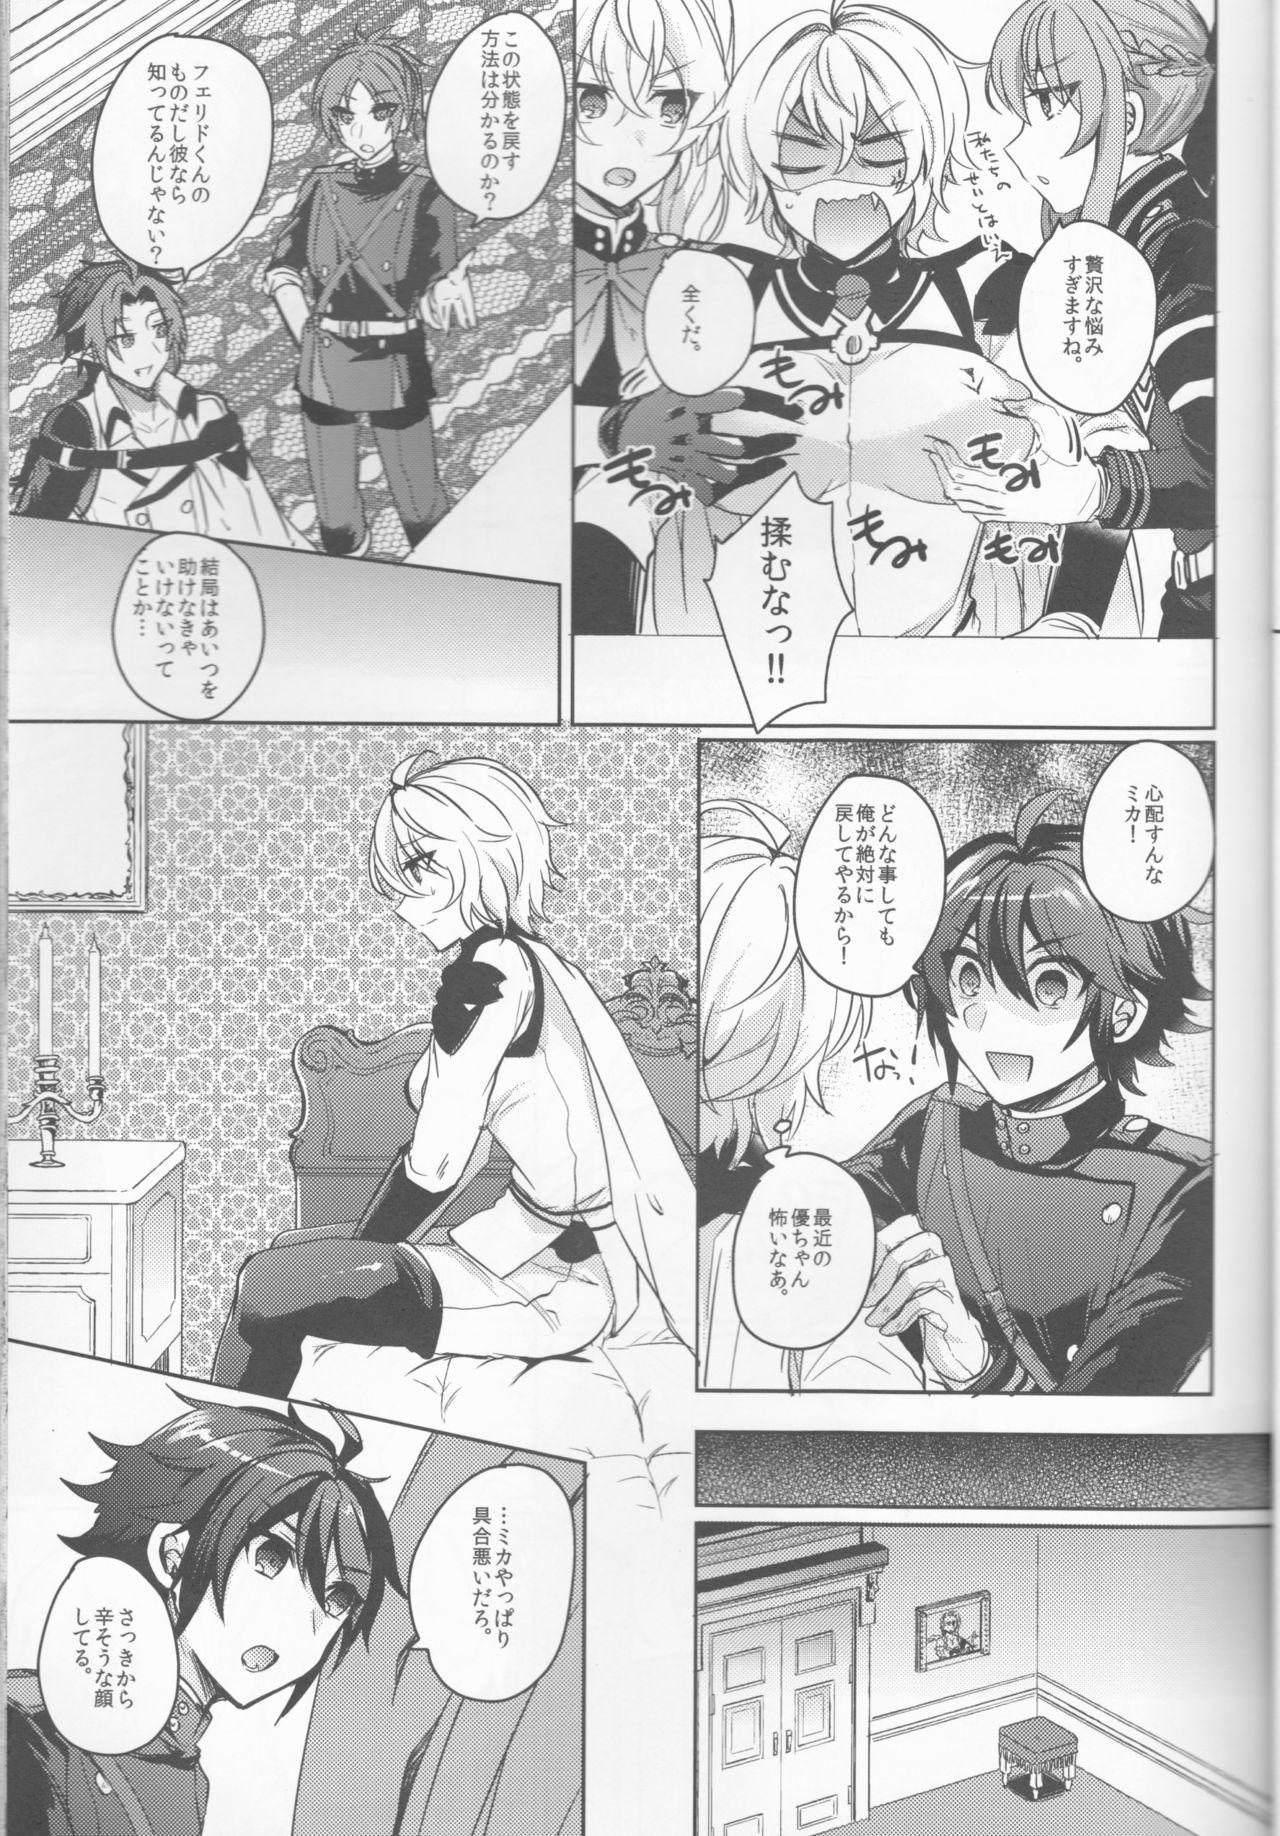 Spreading Zenbu Hoshii no - Seraph of the end Students - Page 8